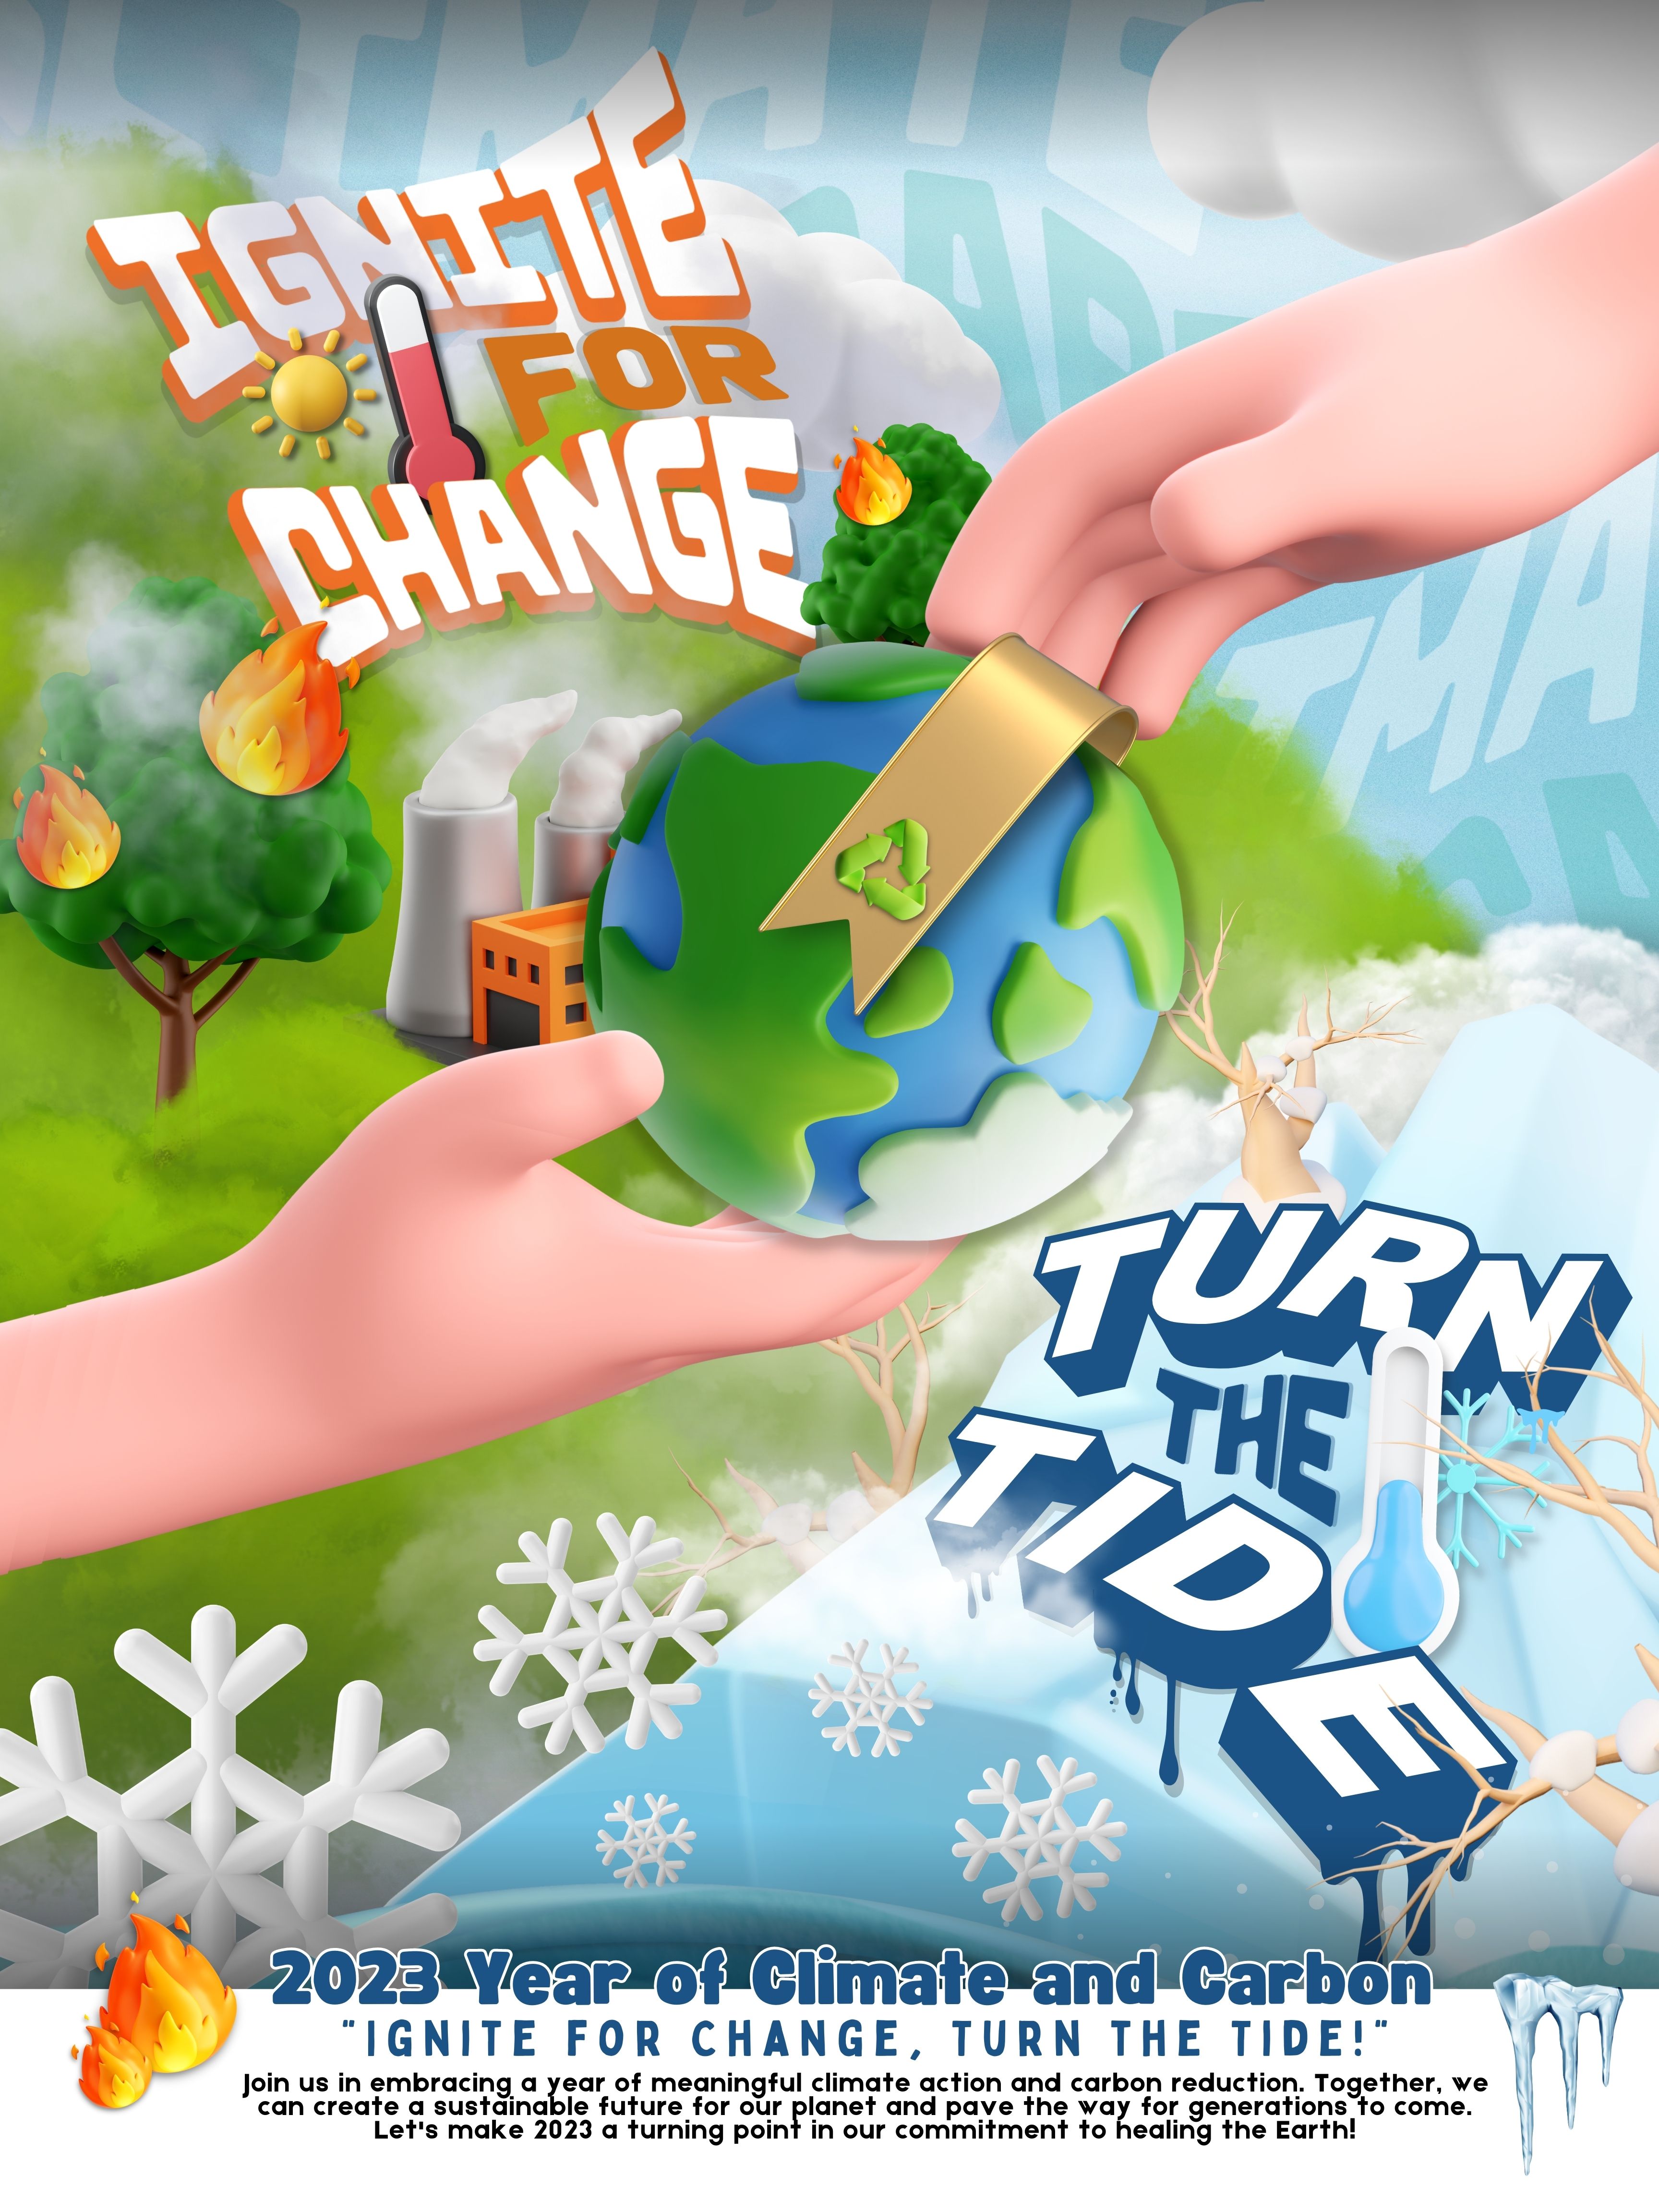 A picture of two hands holding a globe, with images of fires and pollution in the background. The image reads, “Ignite for change, turn the tide.”